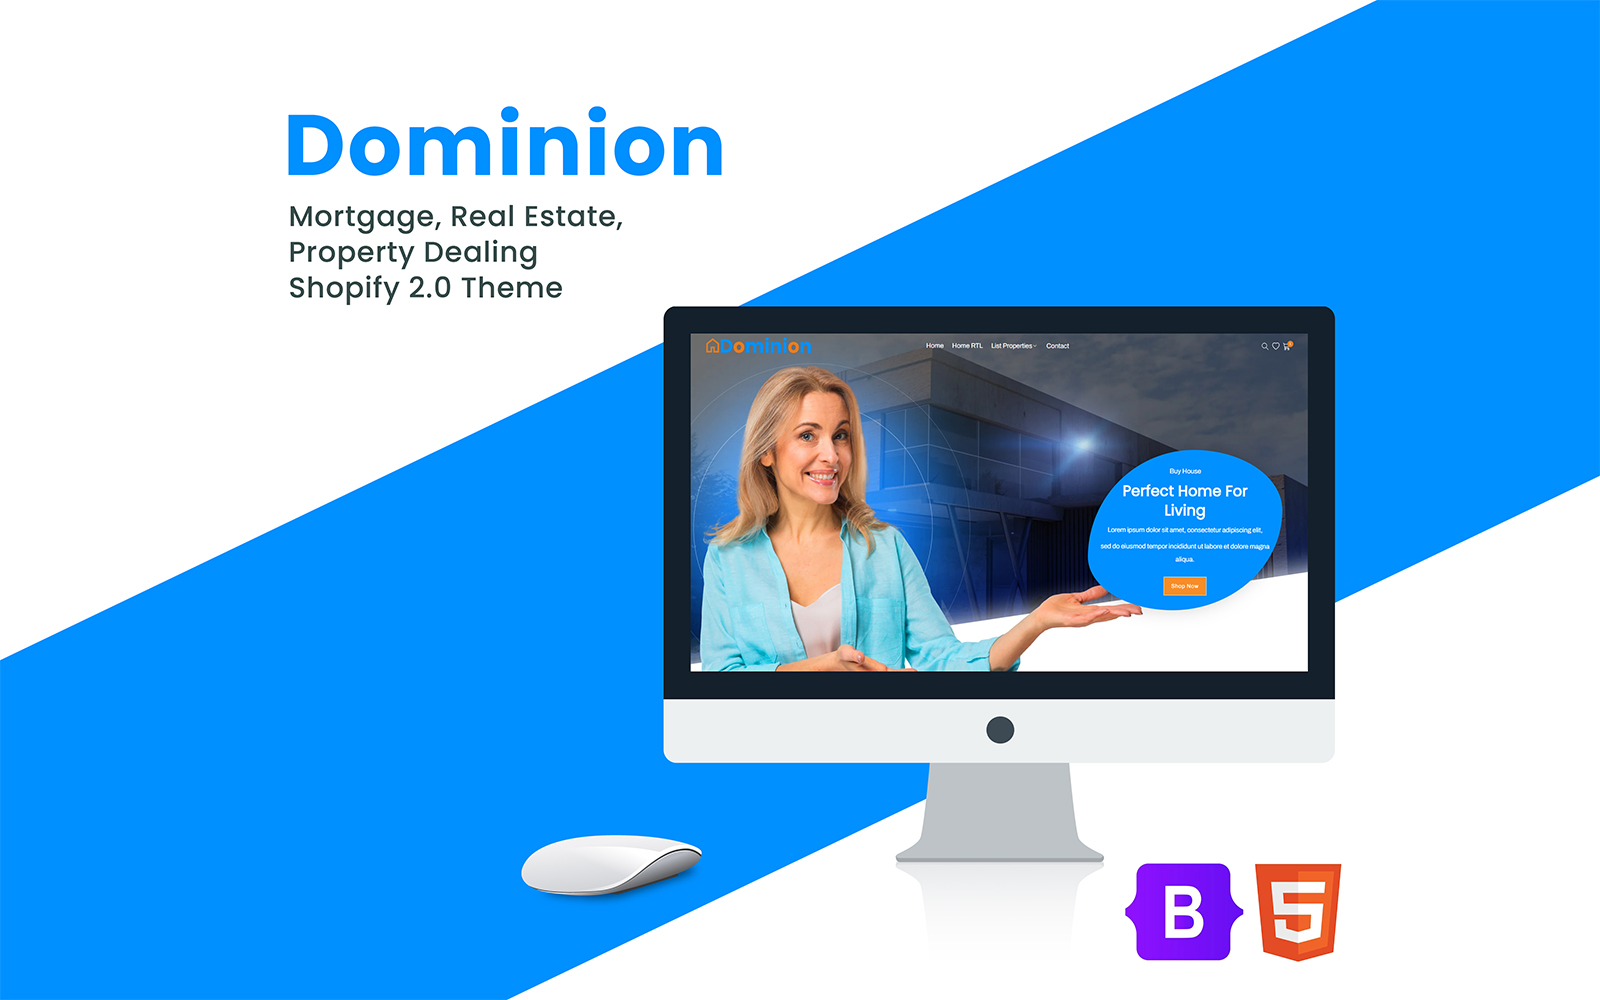 Dominion - Mortgage, Real Estate, Property Dealing Shopify 2.0 Theme